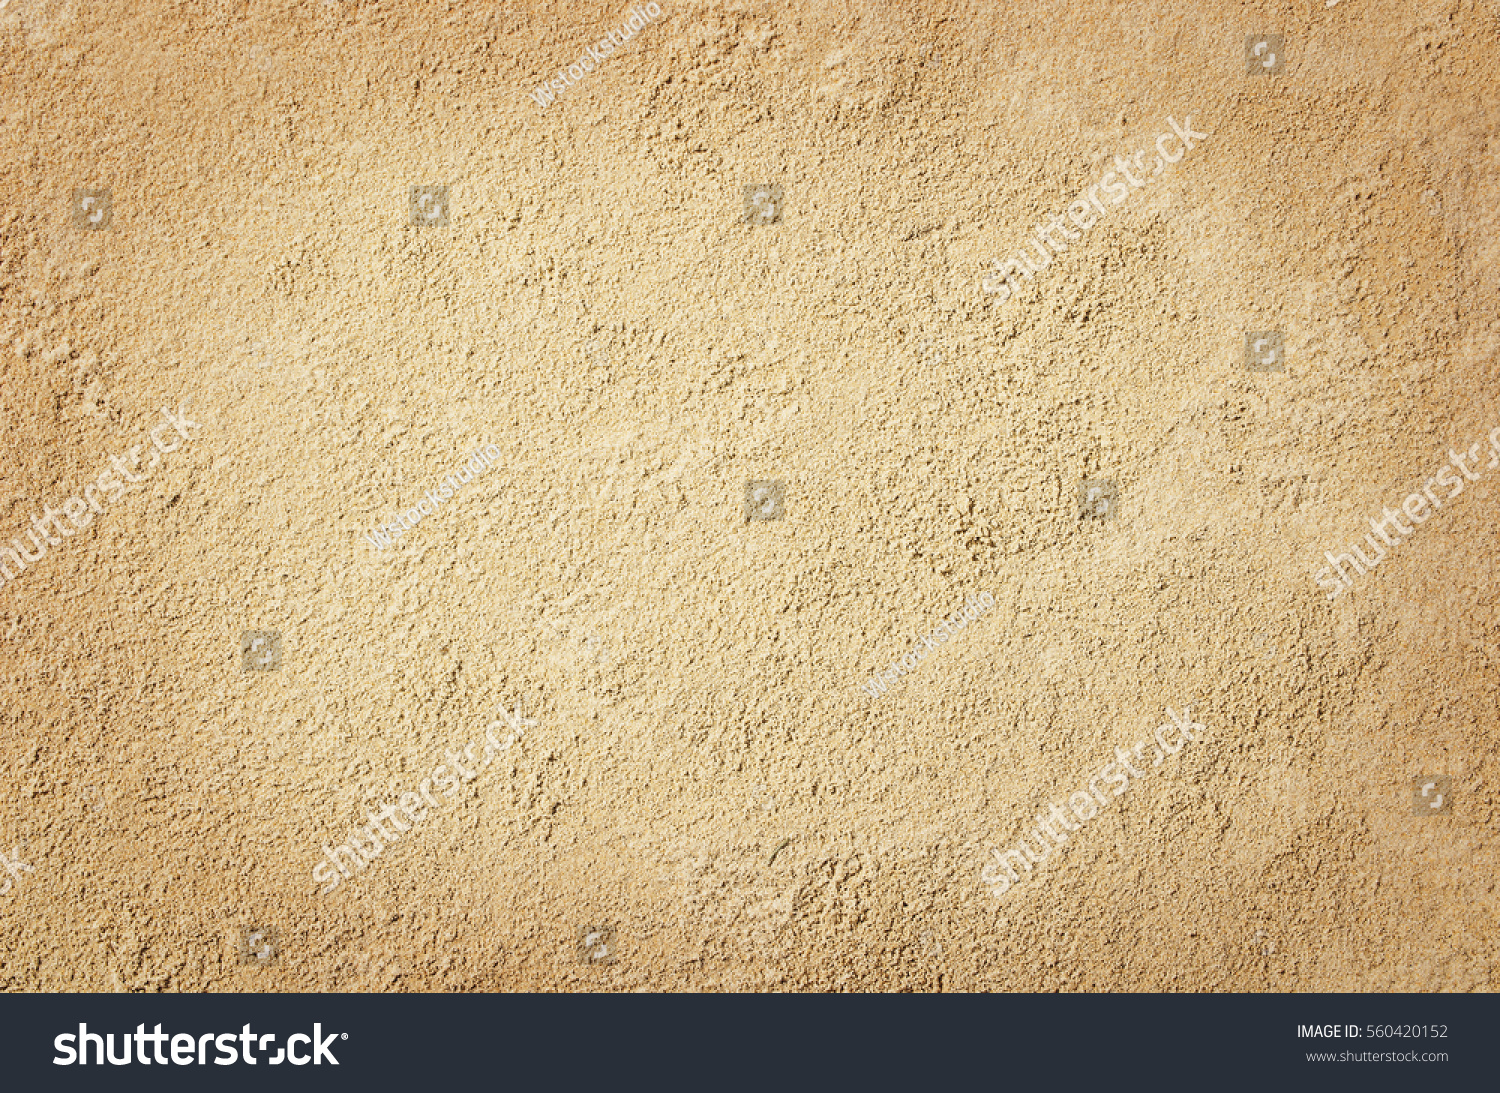 Top view of sandy beach. Background with copy space and visible sand texture. #560420152